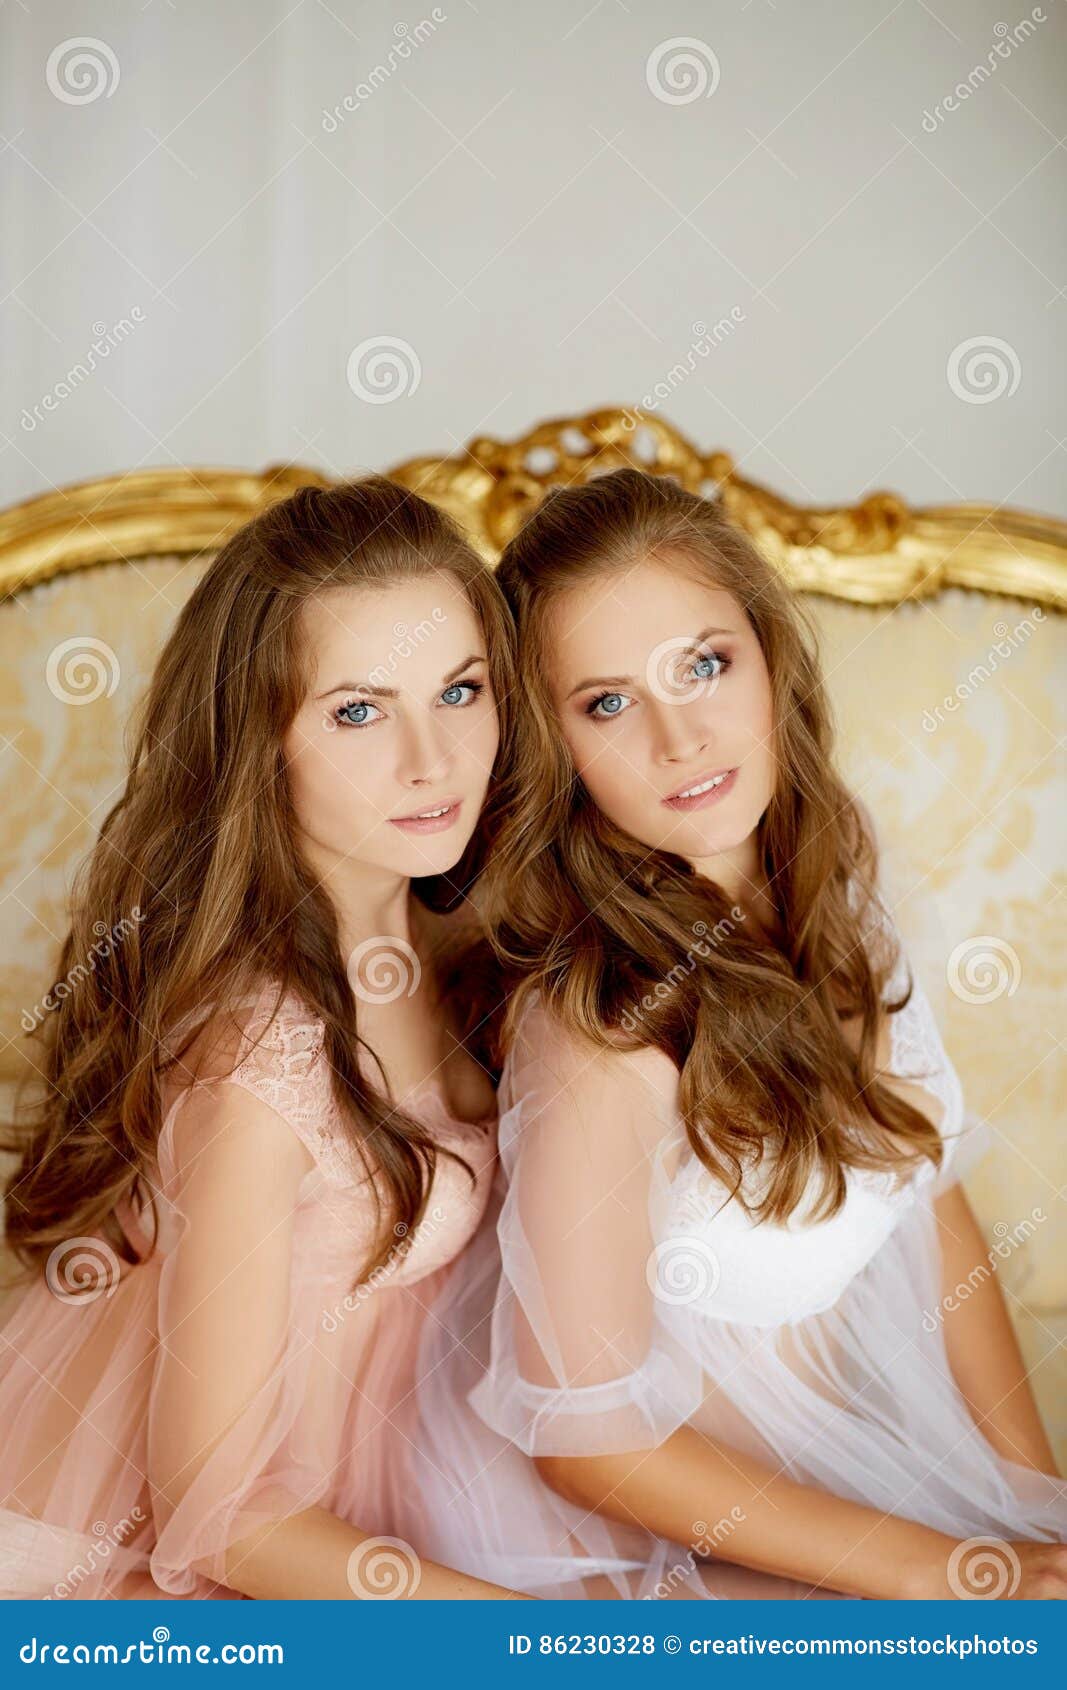 Twin Sisters Picture. Image: 86230328